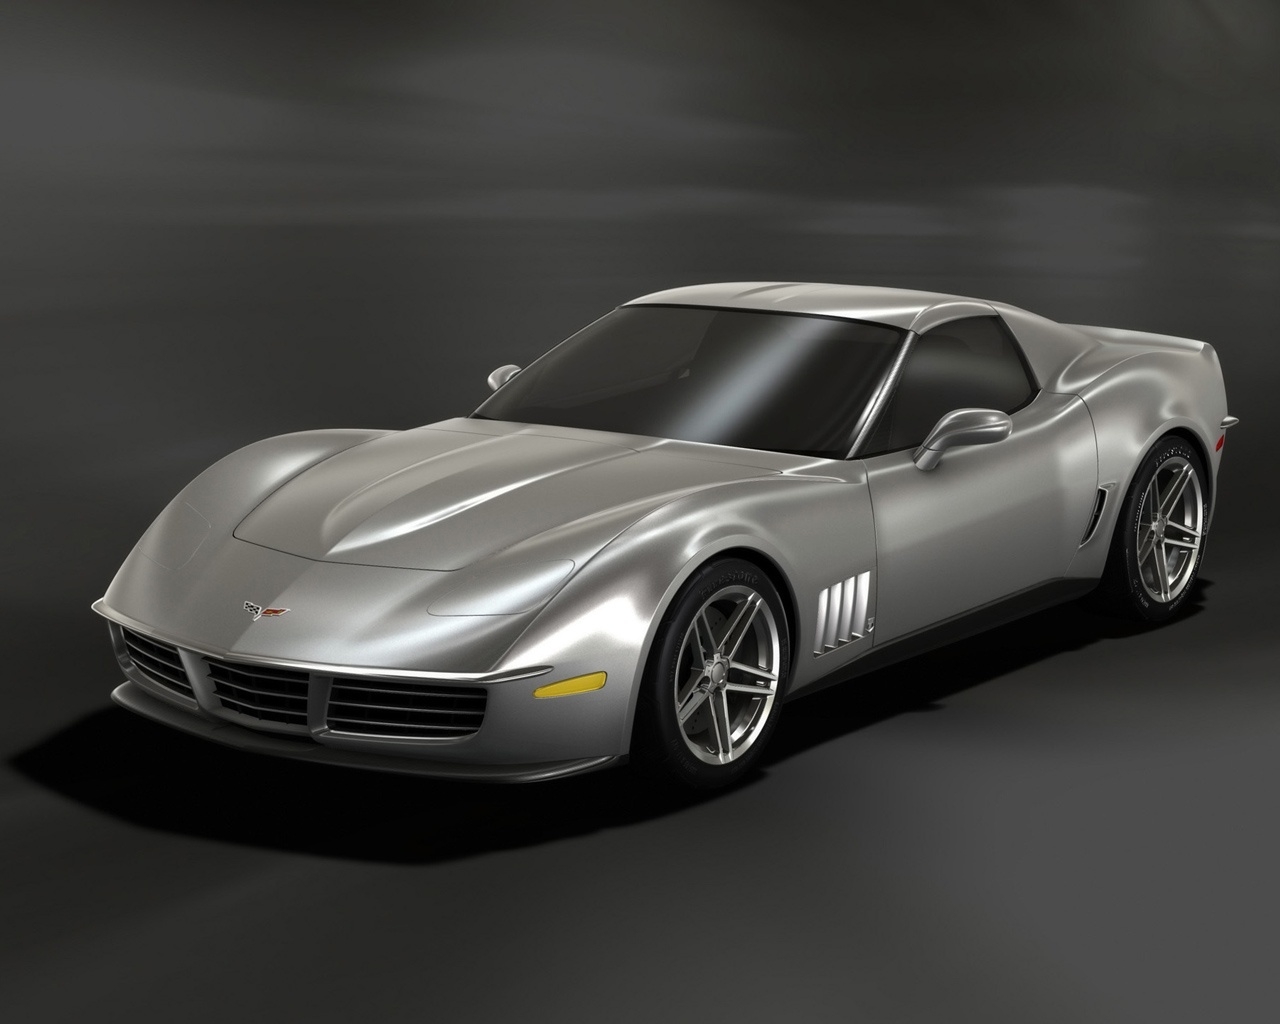 Corvette Retro Stingray Silver Front And Side 2009 for 1280 x 1024 resolution